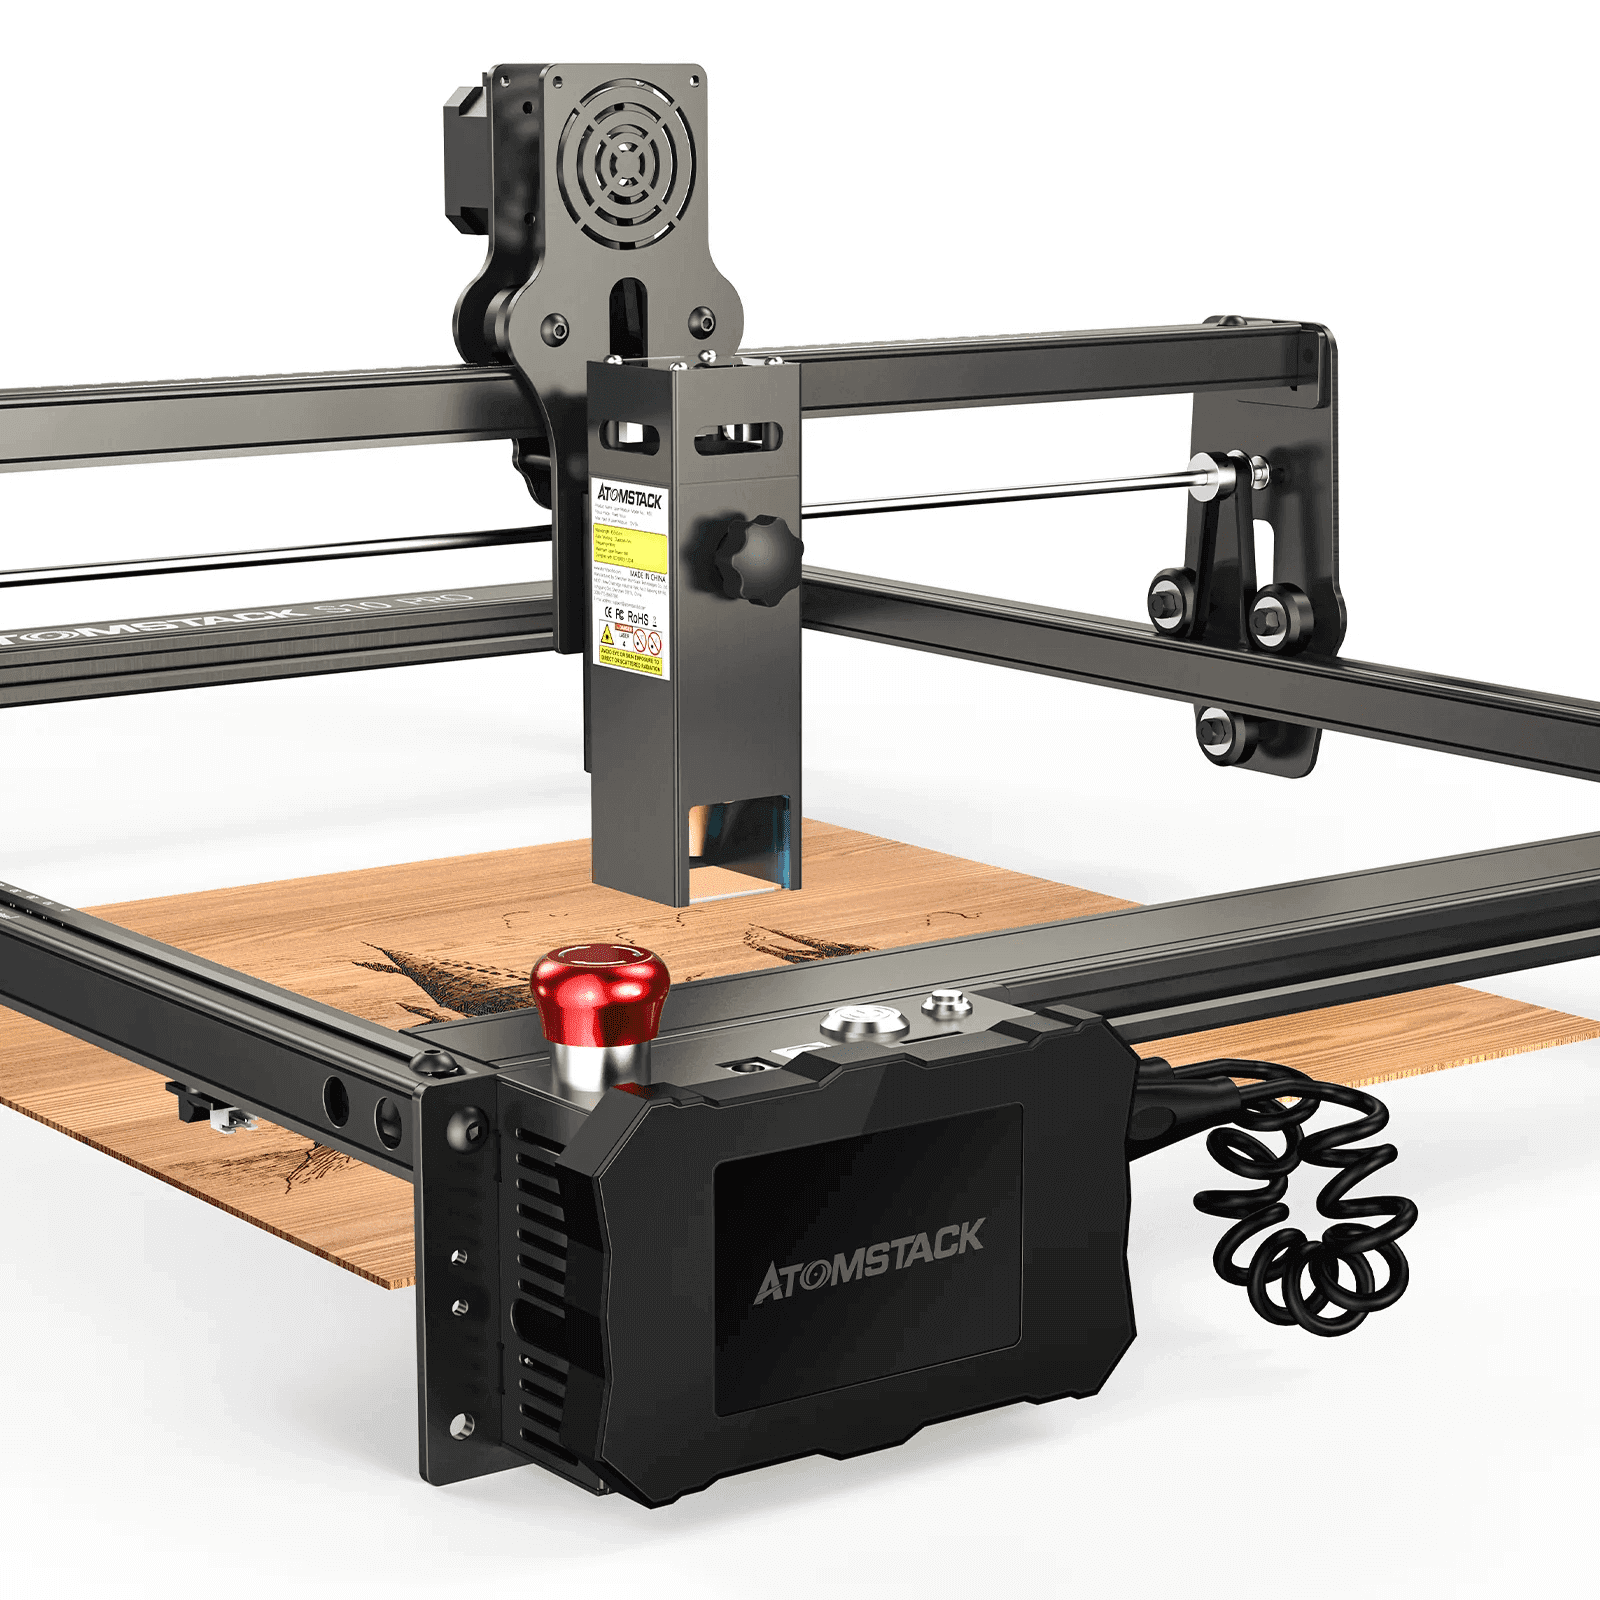 Atomstack Laser Engraver Material Durable Natural Wood For A5/s10